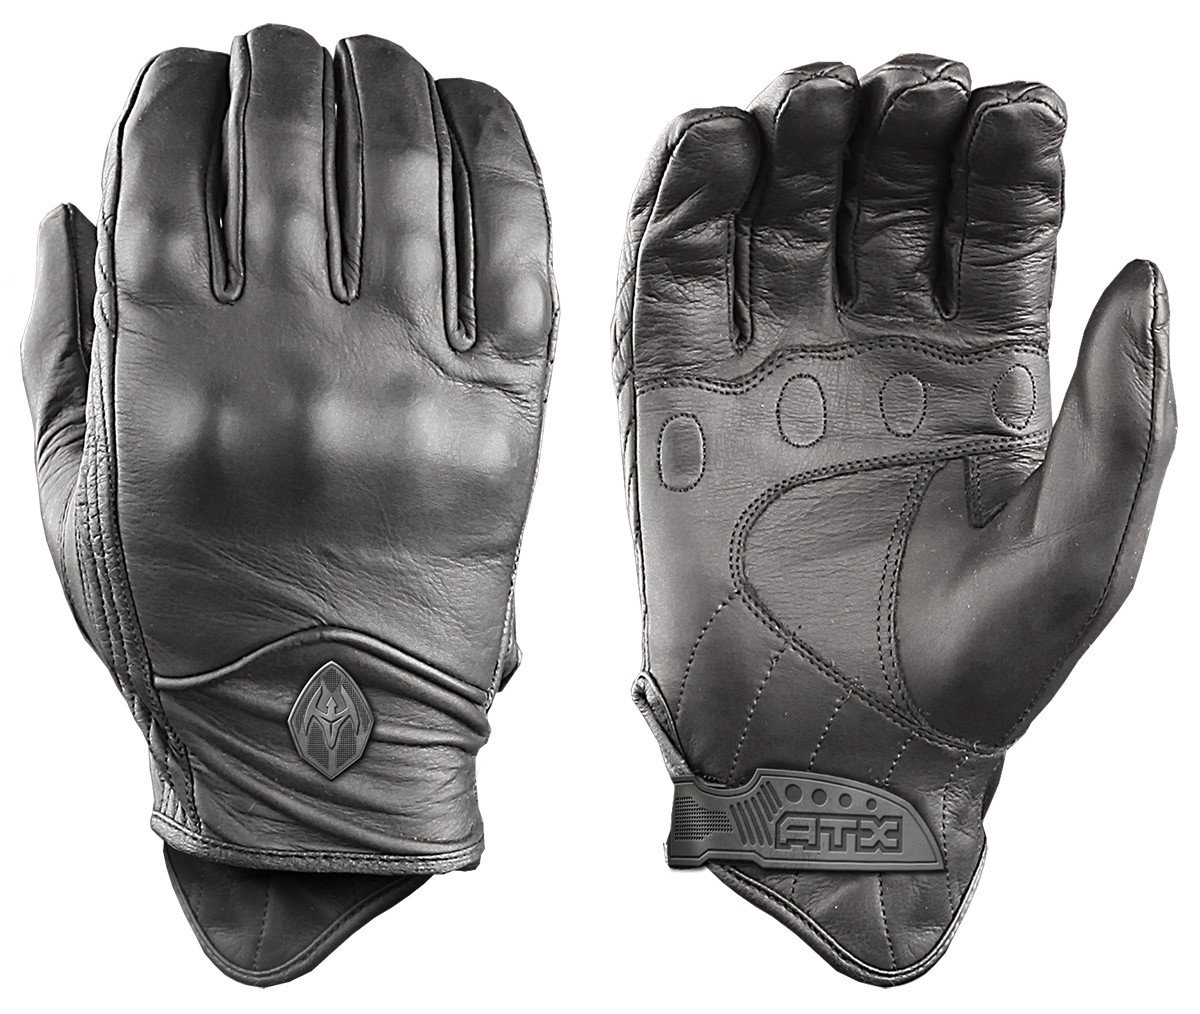 All-Leather Gloves w/ Knuckle Armor (Legacy Version)